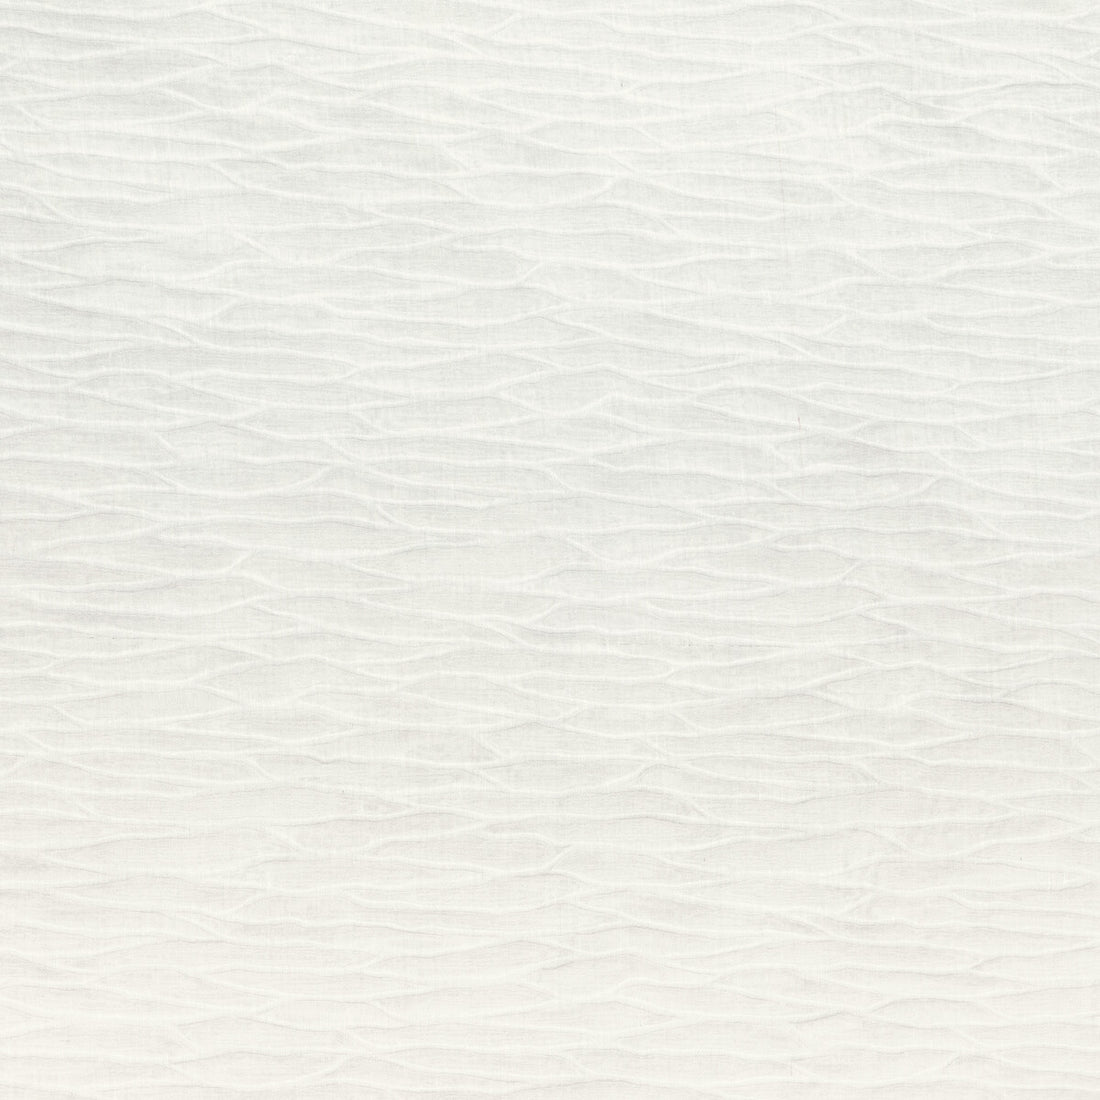 Wavecrest fabric in ivory color - pattern 4855.1.0 - by Kravet Basics in the Monterey collection